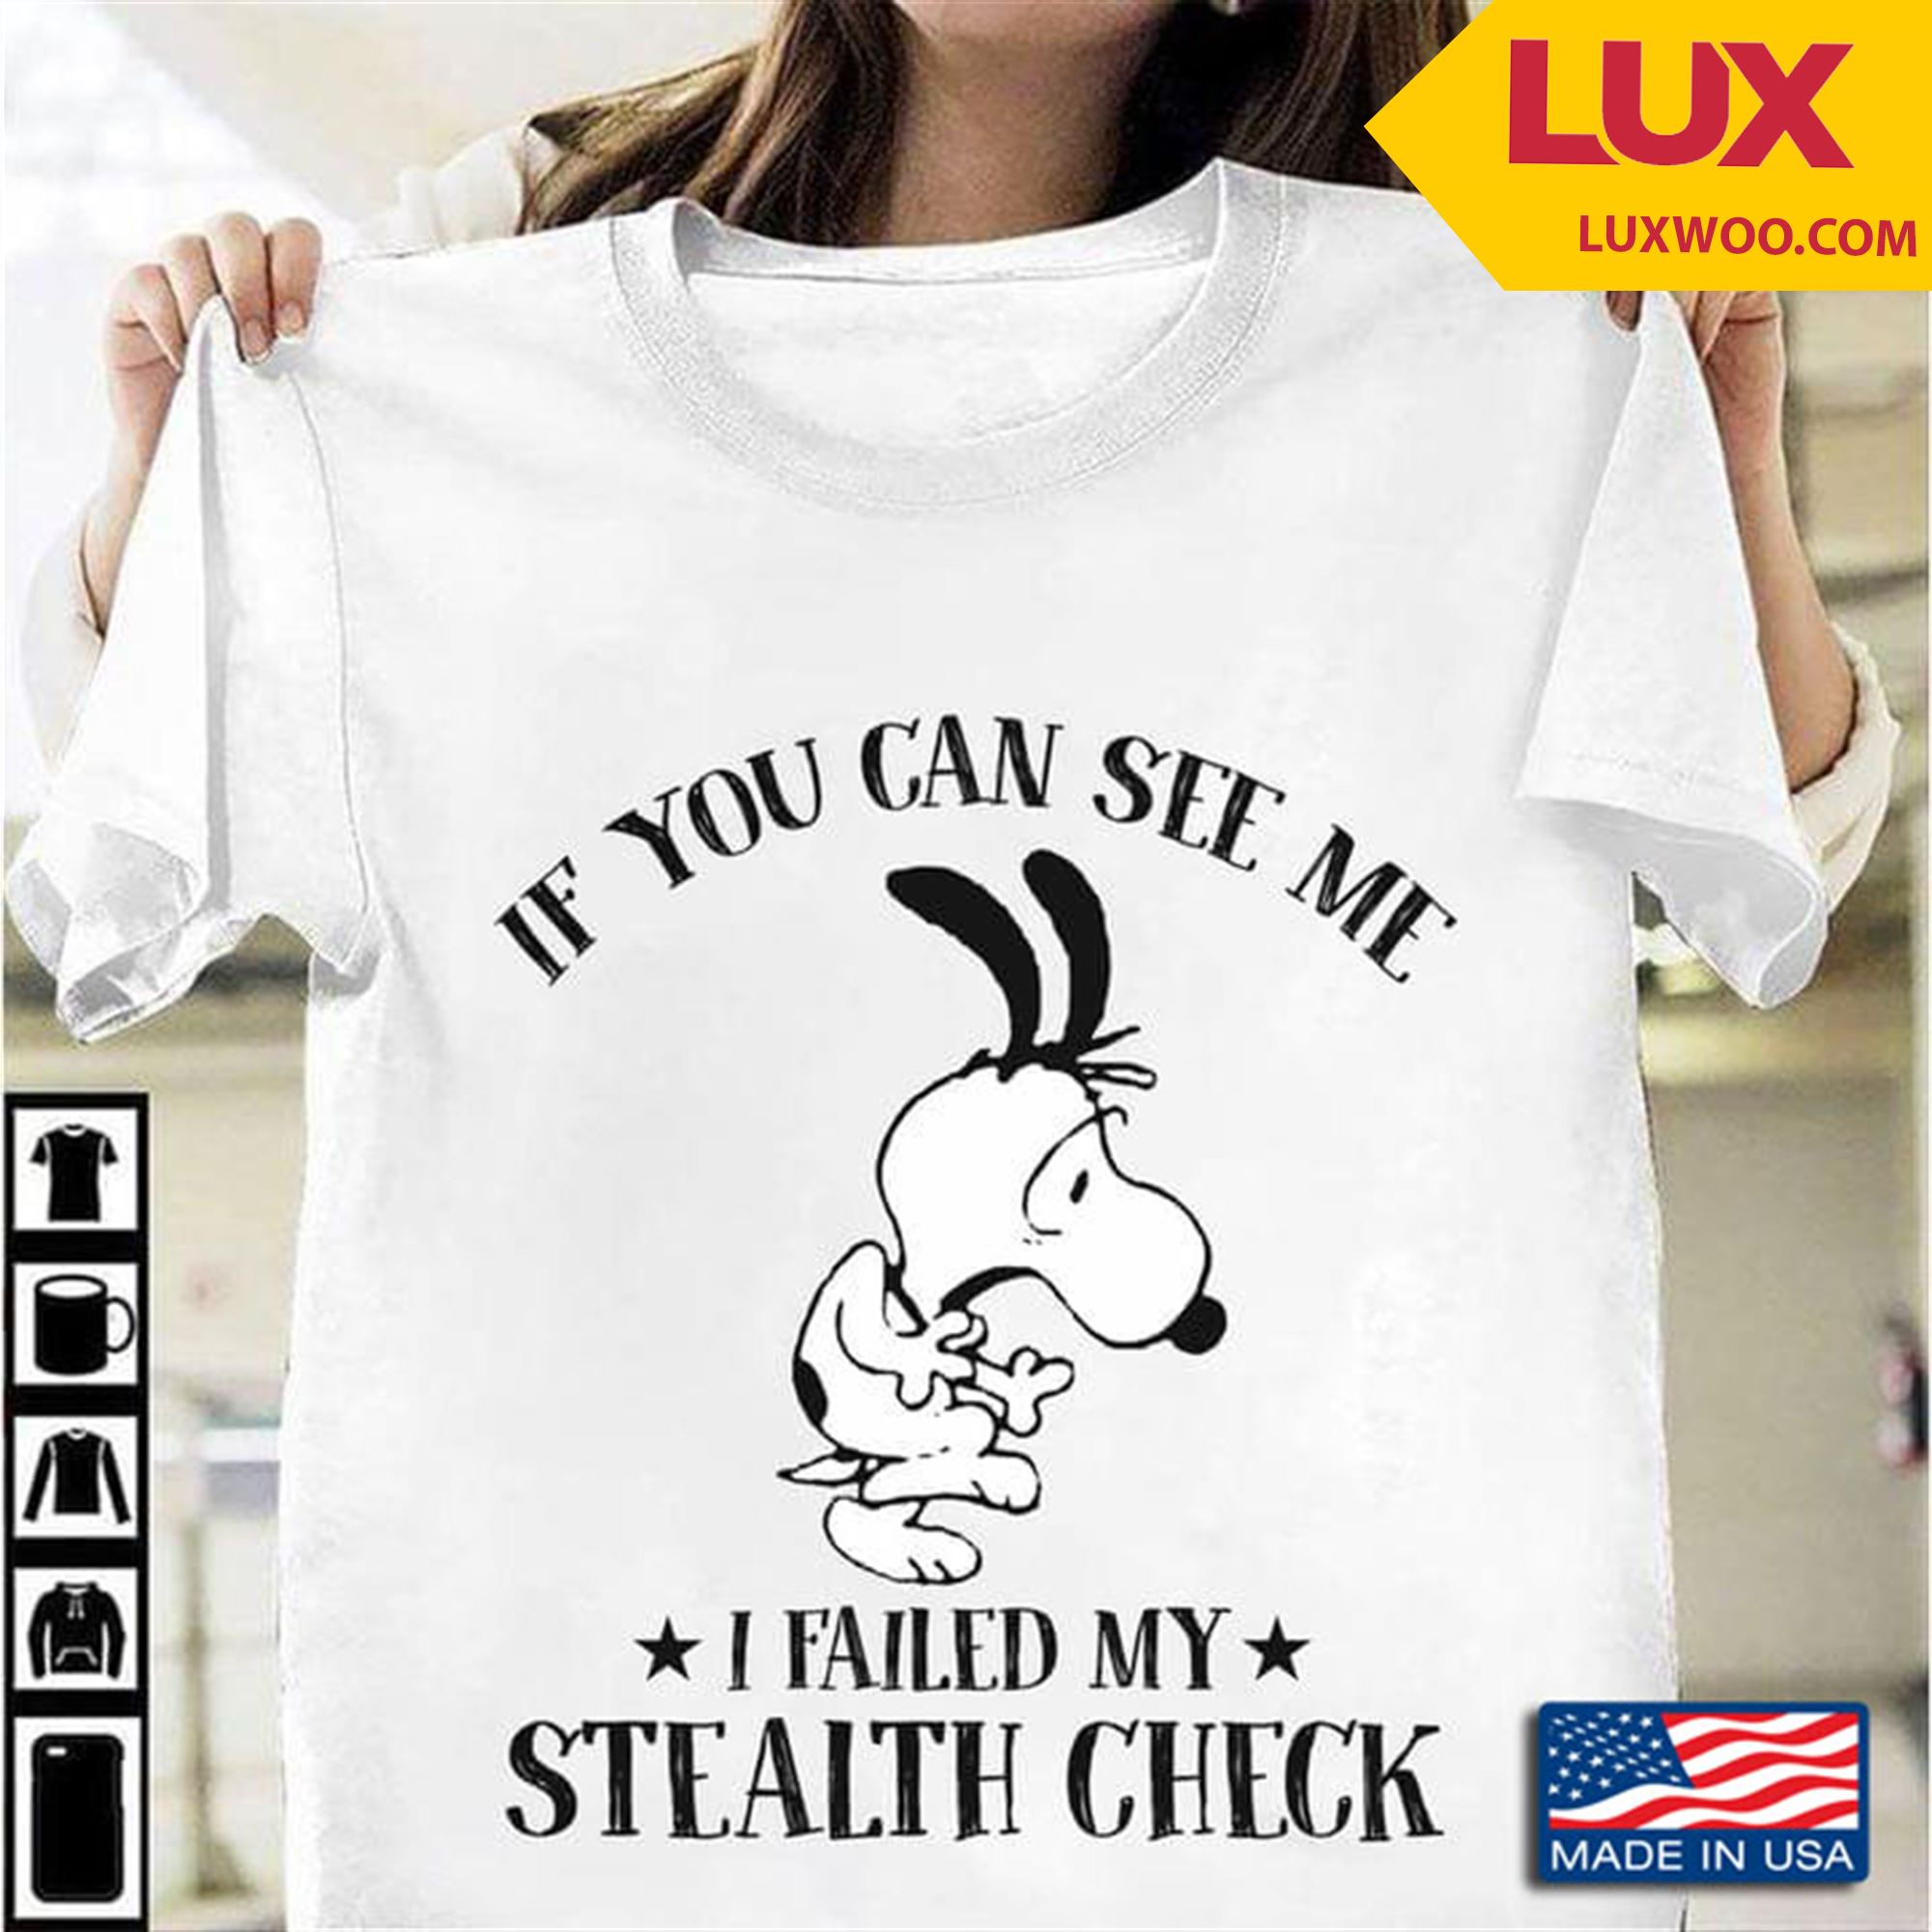 Snoopy If You Can See Me I Failed My Stealth Check Tshirt Plus Size Up To 5xl